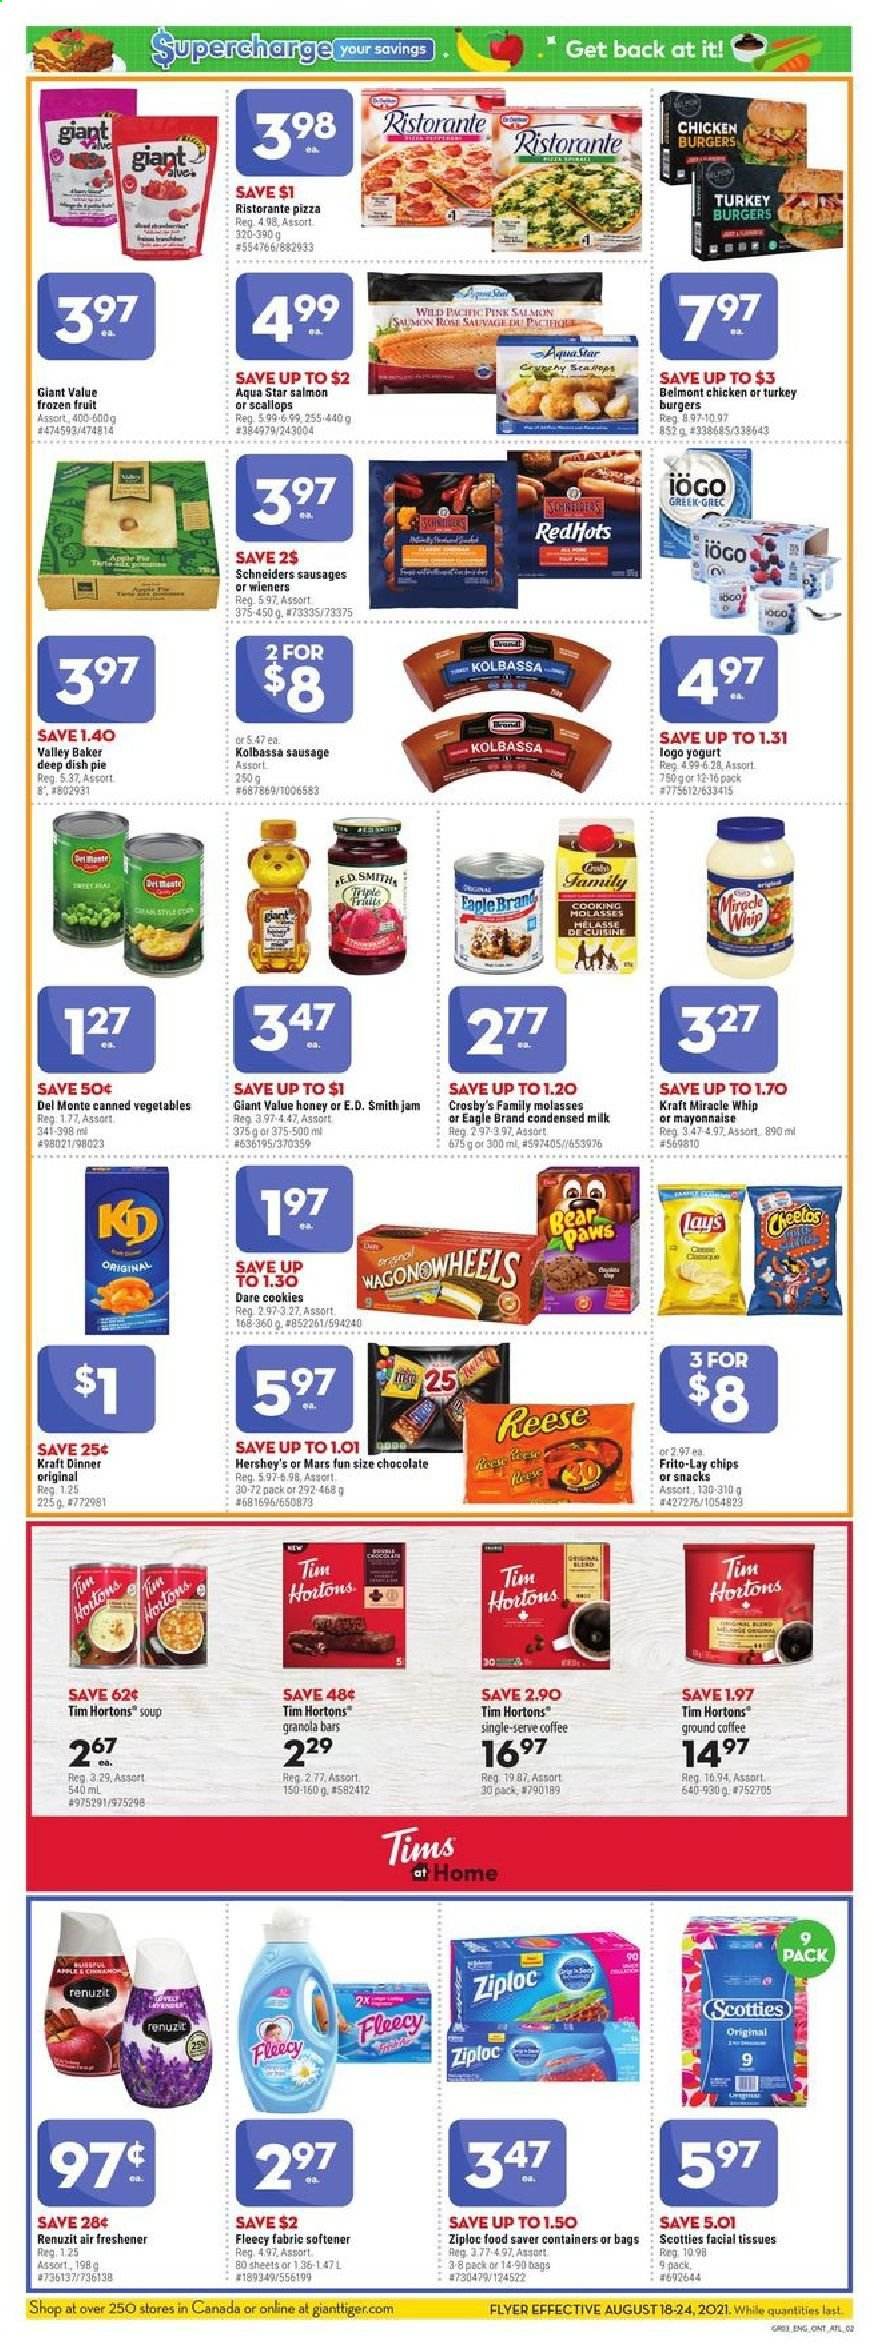 thumbnail - Giant Tiger Flyer - August 18, 2021 - August 24, 2021 - Sales products - pie, salmon, scallops, pizza, soup, hamburger, Kraft®, sausage, yoghurt, milk, condensed milk, Miracle Whip, Hershey's, cookies, chocolate, Mars, Cheetos, Lay’s, Frito-Lay, canned vegetables, granola bar, molasses, fruit jam, coffee, ground coffee, wine, rosé wine, turkey burger, tissues, fabric softener, facial tissues, bag, Ziploc, Renuzit, air freshener, Paws, rose, chips. Page 2.